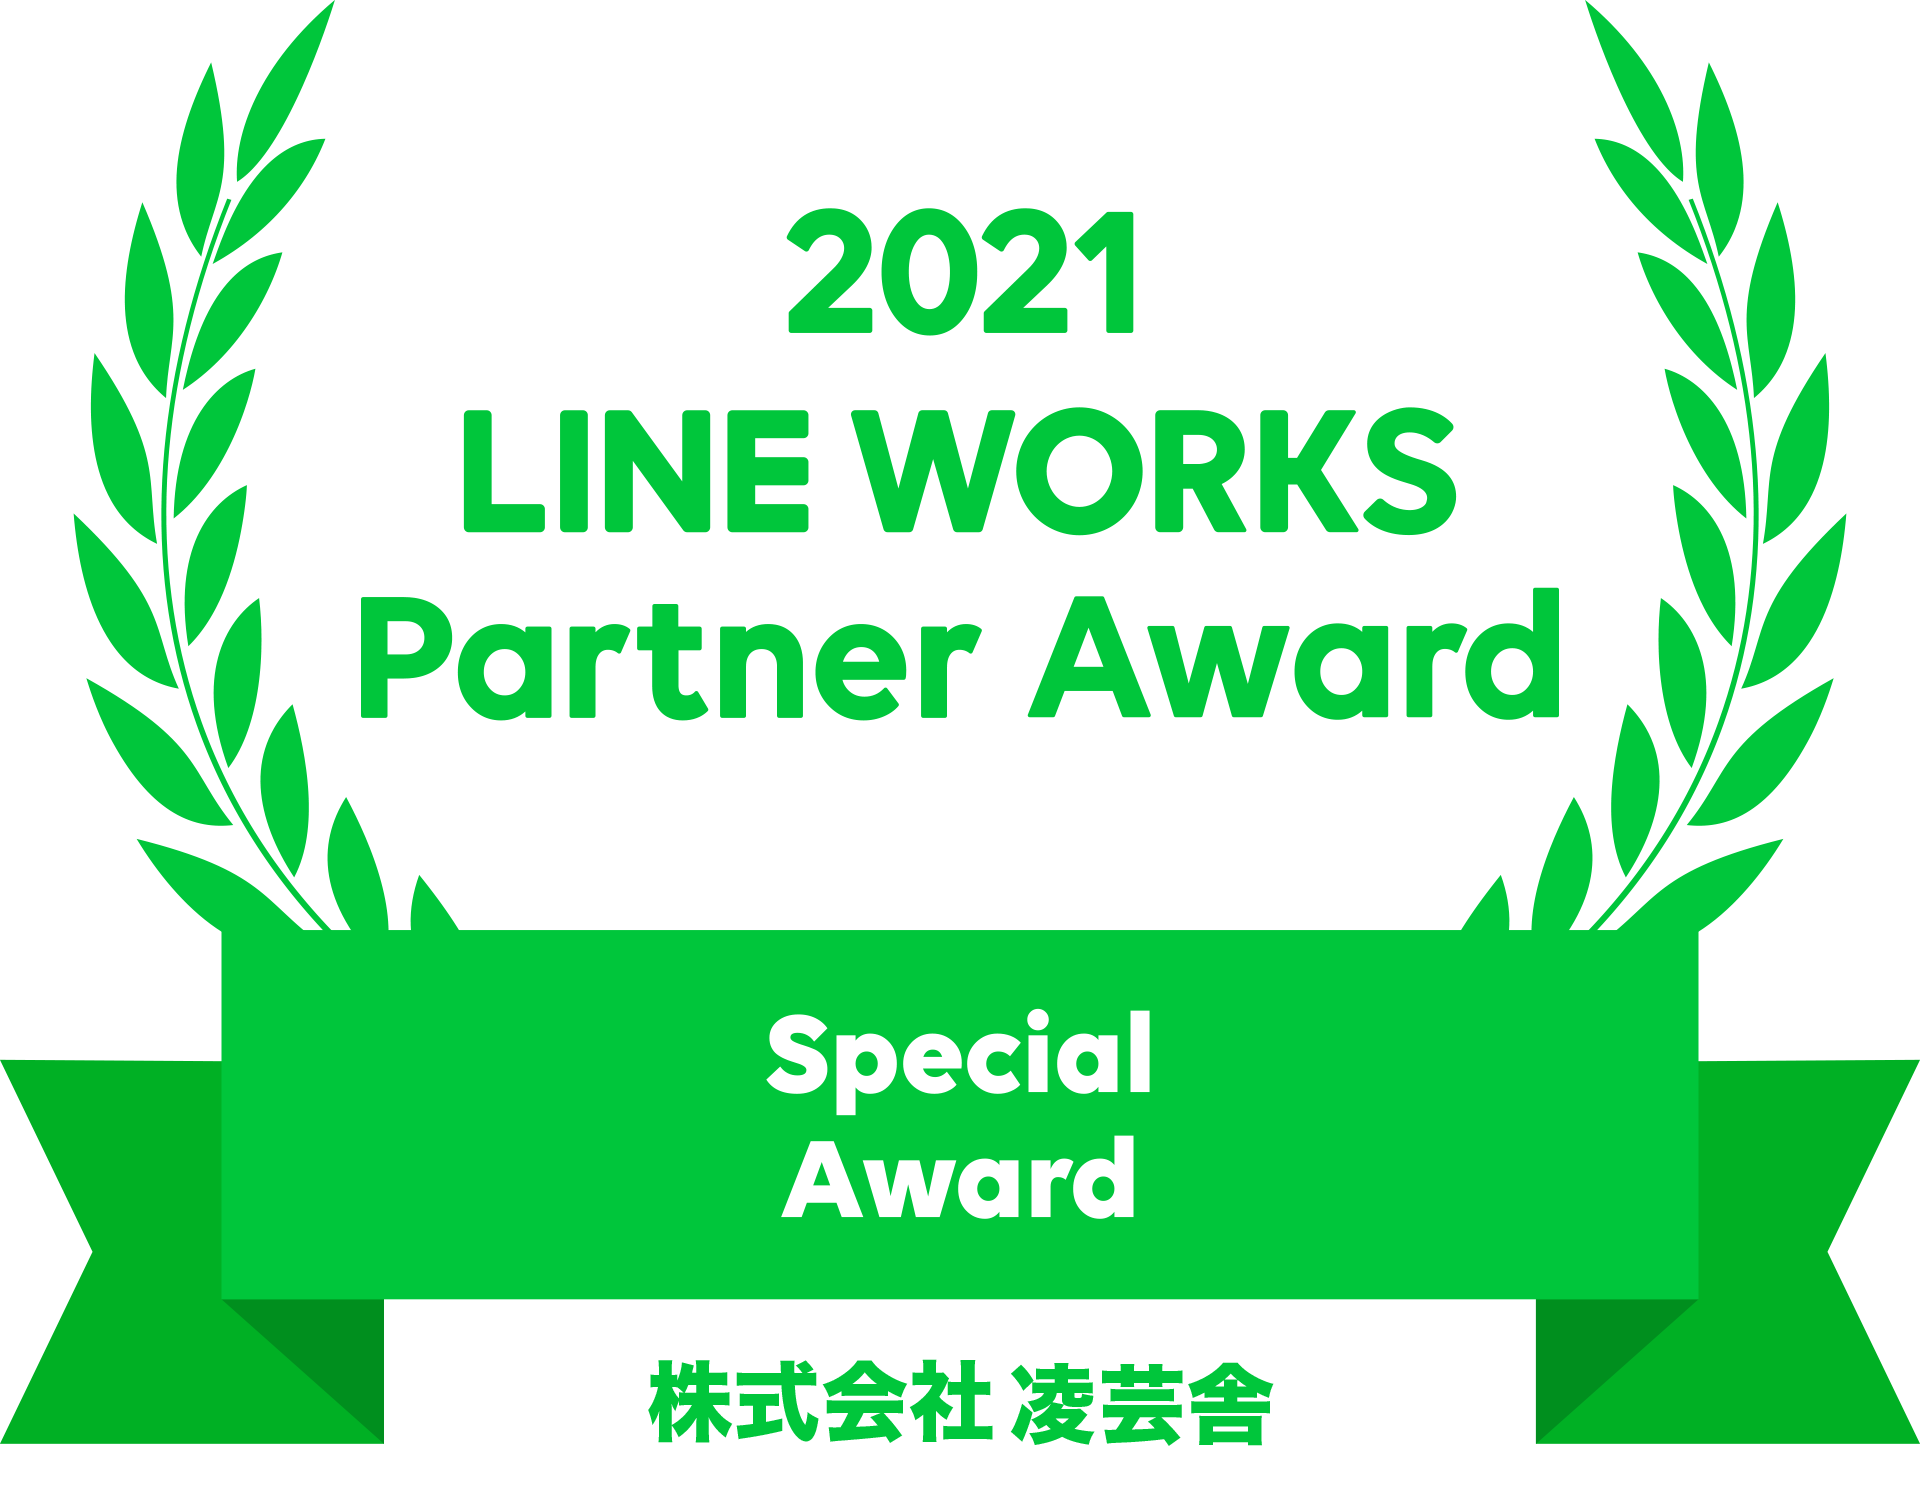 IT＆カルチャーカンパニー 凌芸舎、ビジネス版LINE『LINE WORKS』の2021 LINE WORKS Partner Conference にてSpecial Awardを受賞。